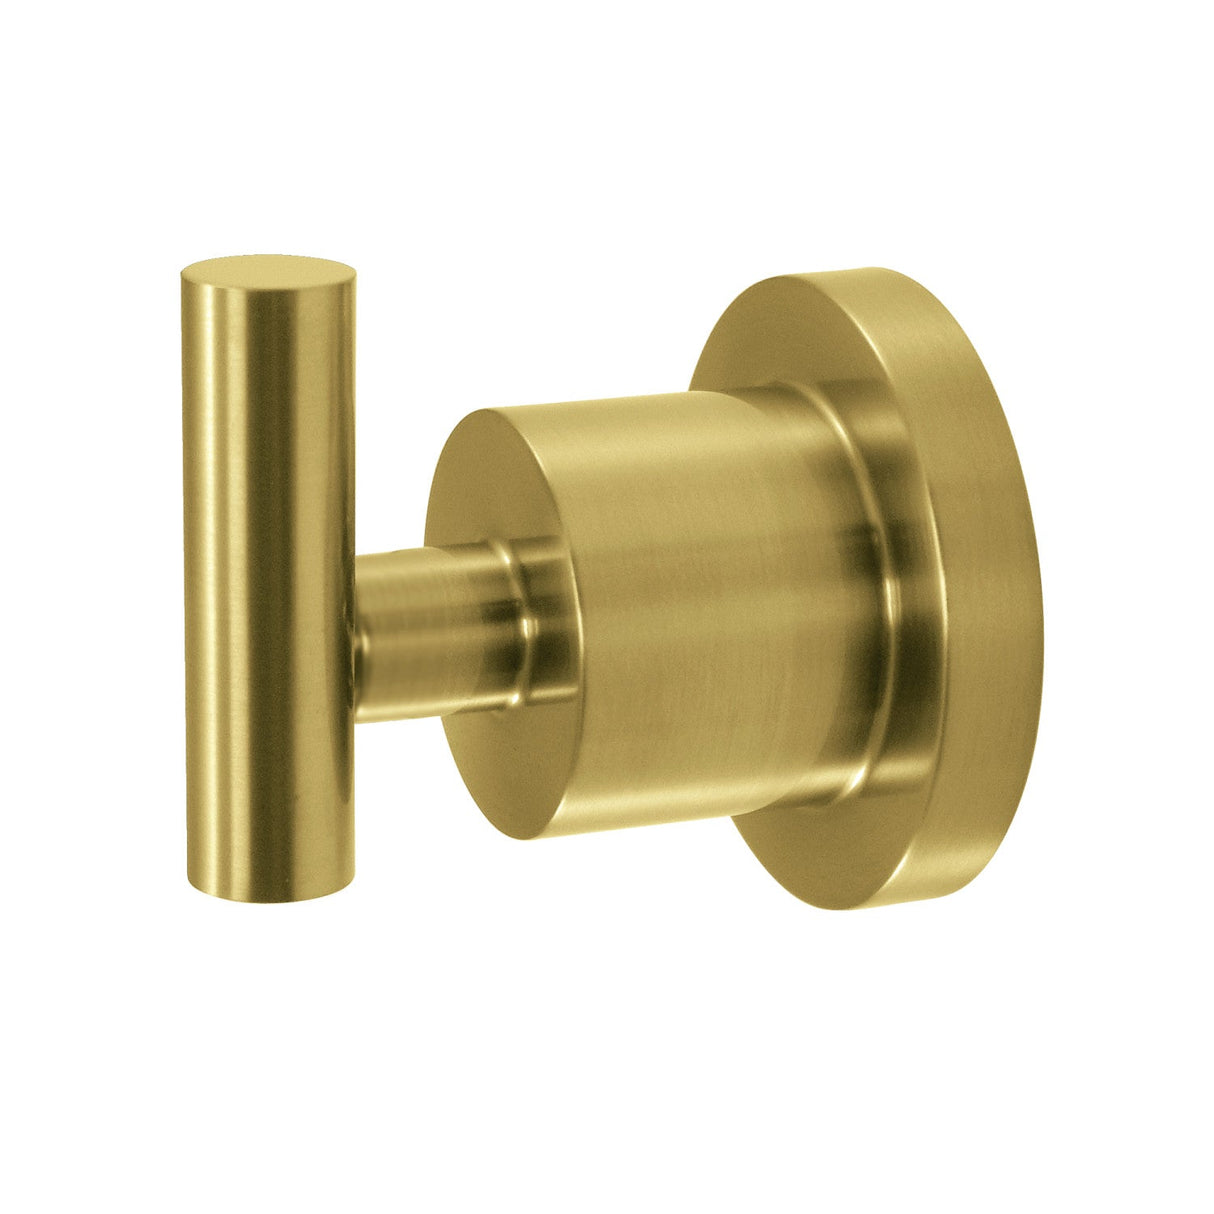 Concord BA8217BB Robe Hook, Brushed Brass